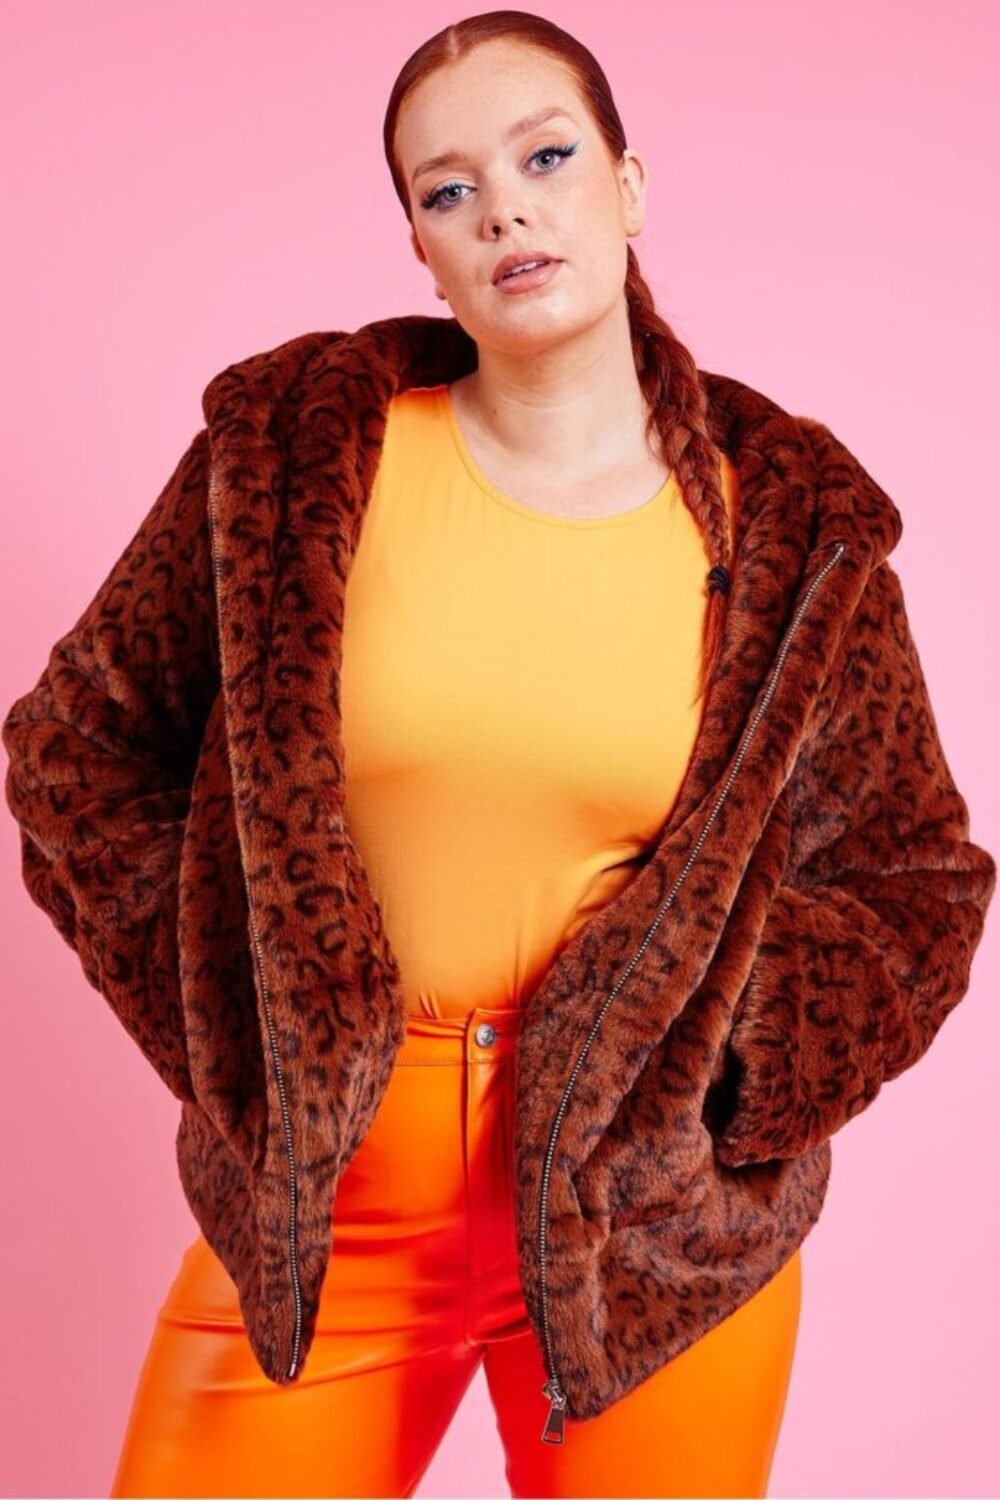 Shop Lux Brown Oversized Faux Fur Jacket and women's luxury and designer clothes at www.lux-apparel.co.uk